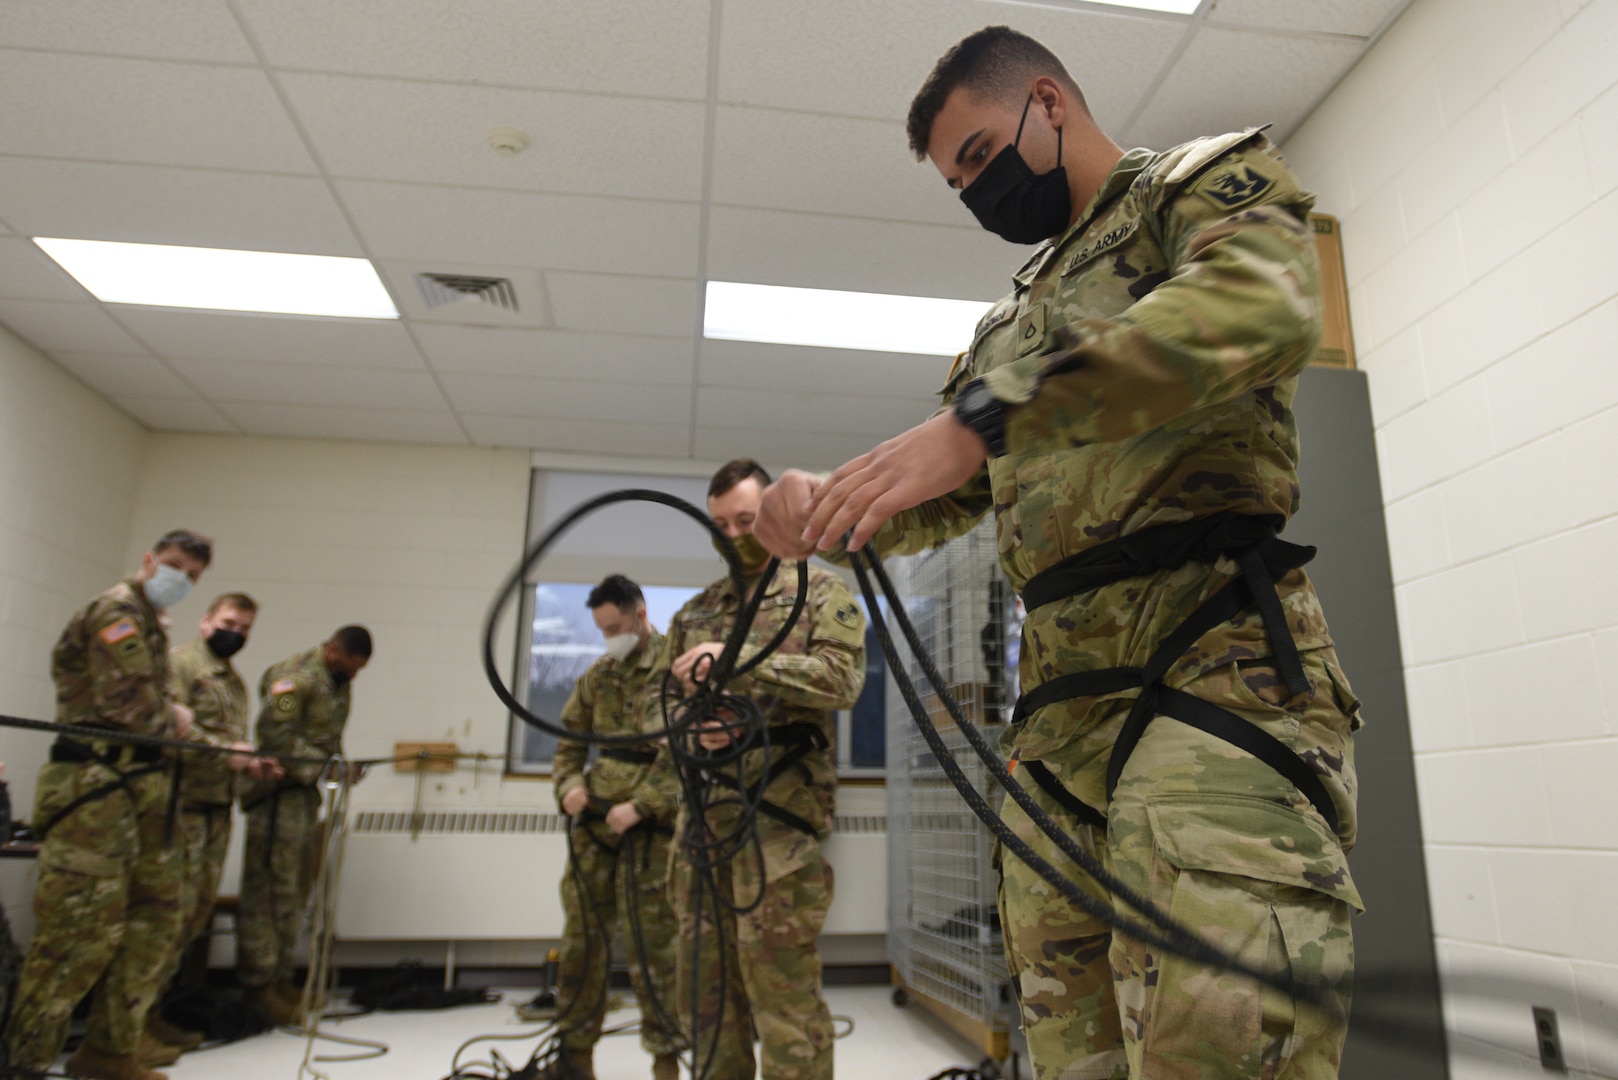 Pfc. Cassio Alvarenga, a student at the U.S. Army Mountain Warfare School’s Basic Military Mountaineer Course, practices knot-tying Jan. 20, 2022, the night before he and other students are tested on 27 different knots. The AMWS is a U.S. Army Training and Doctrine Command school operated by the Vermont Army National Guard at Camp Ethan Allen Training Site, Vermont.